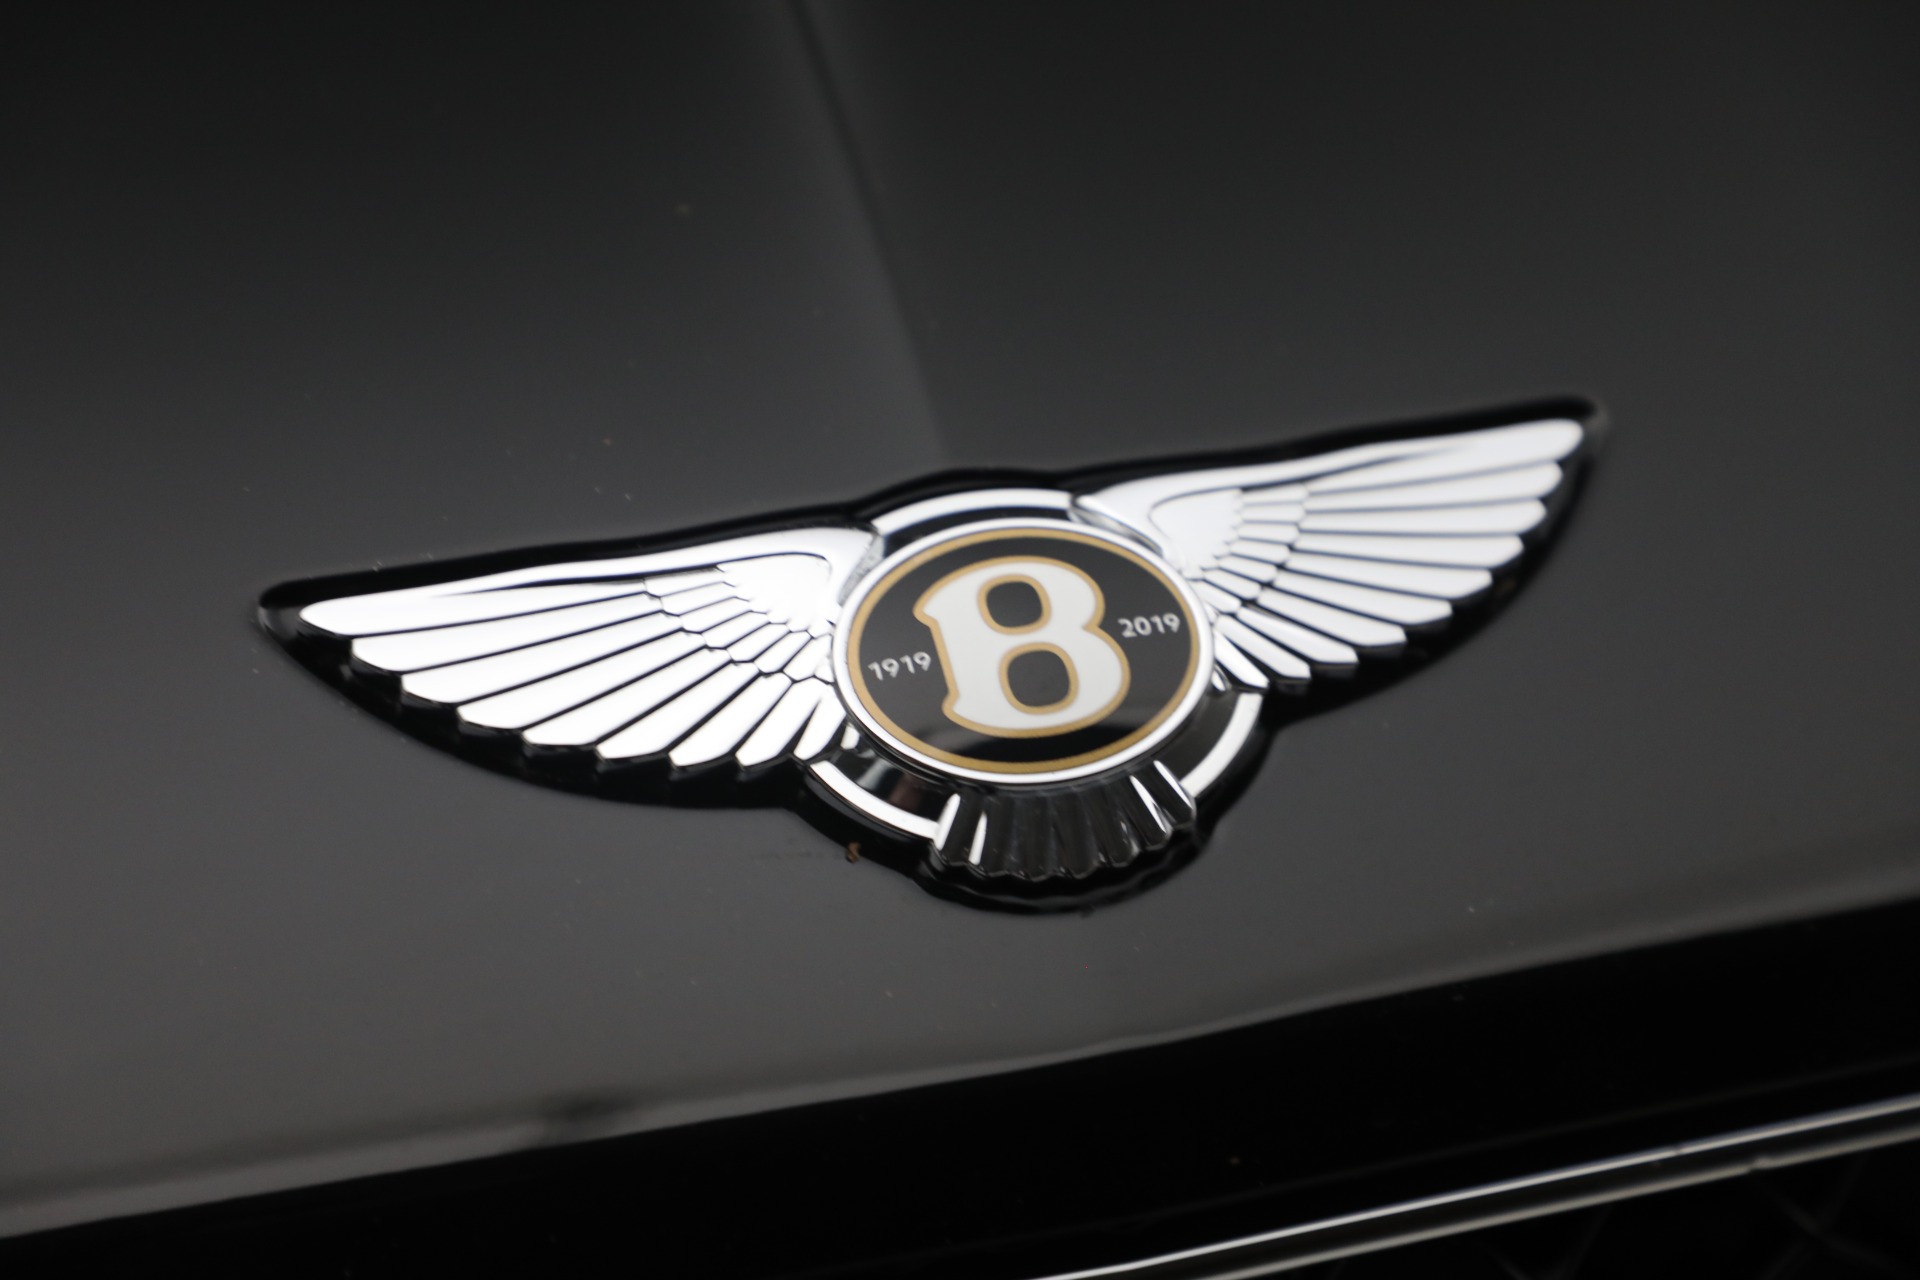 Used 2020 Bentley Continental GTC First Edition